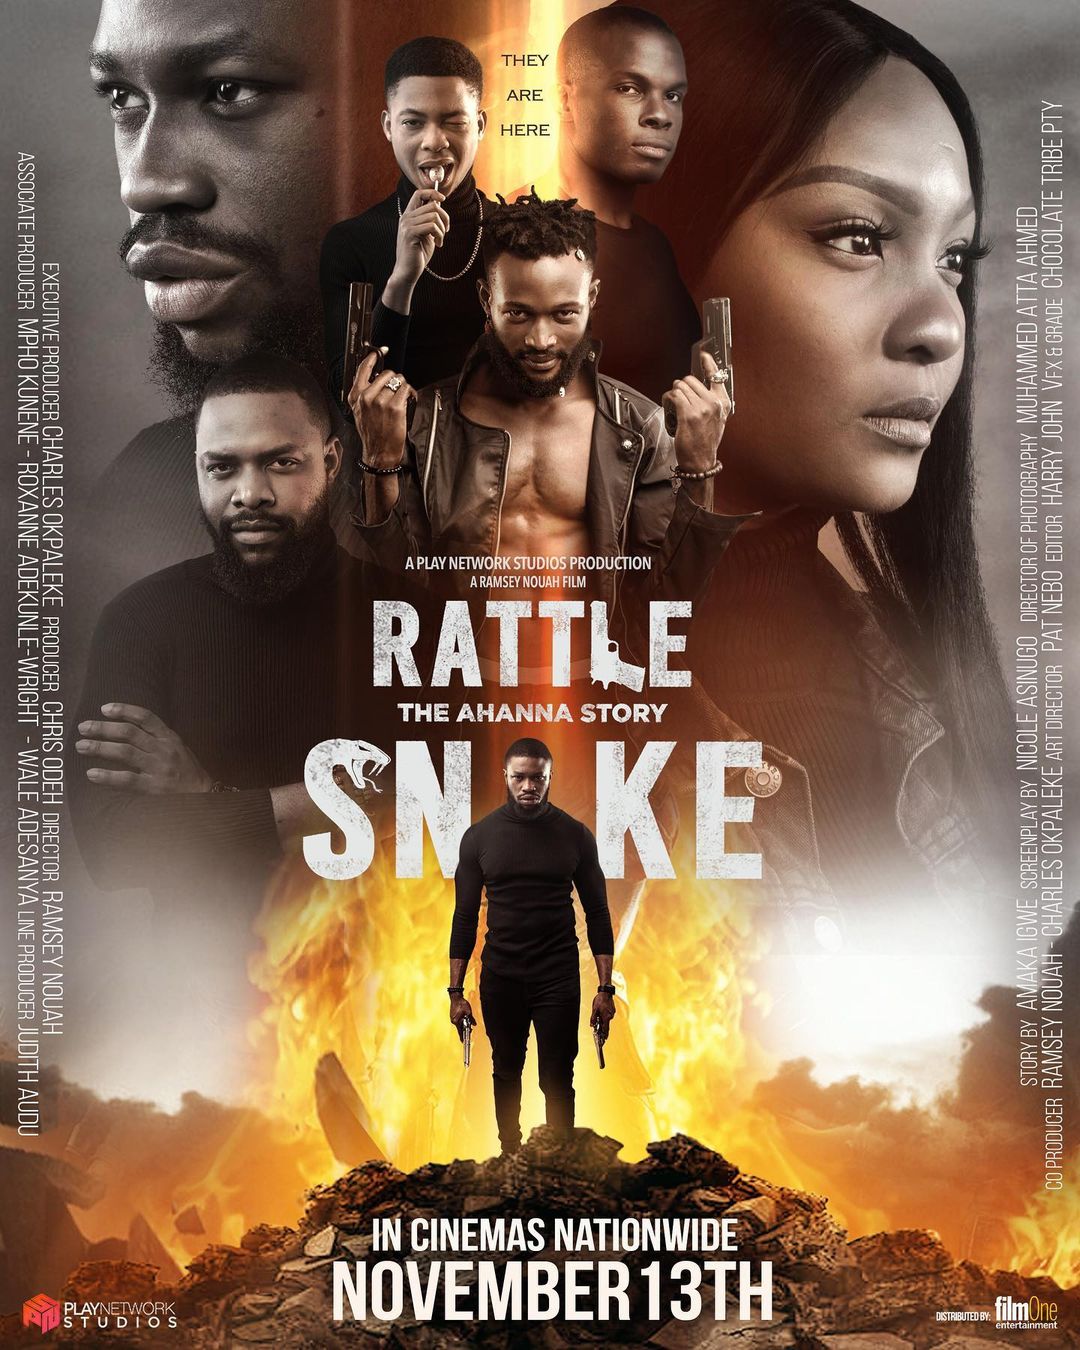 124037229 1543228275861646 4819321997327807058 n - Rattlesnake: Projections for a N19.5 Million Opening Weekend